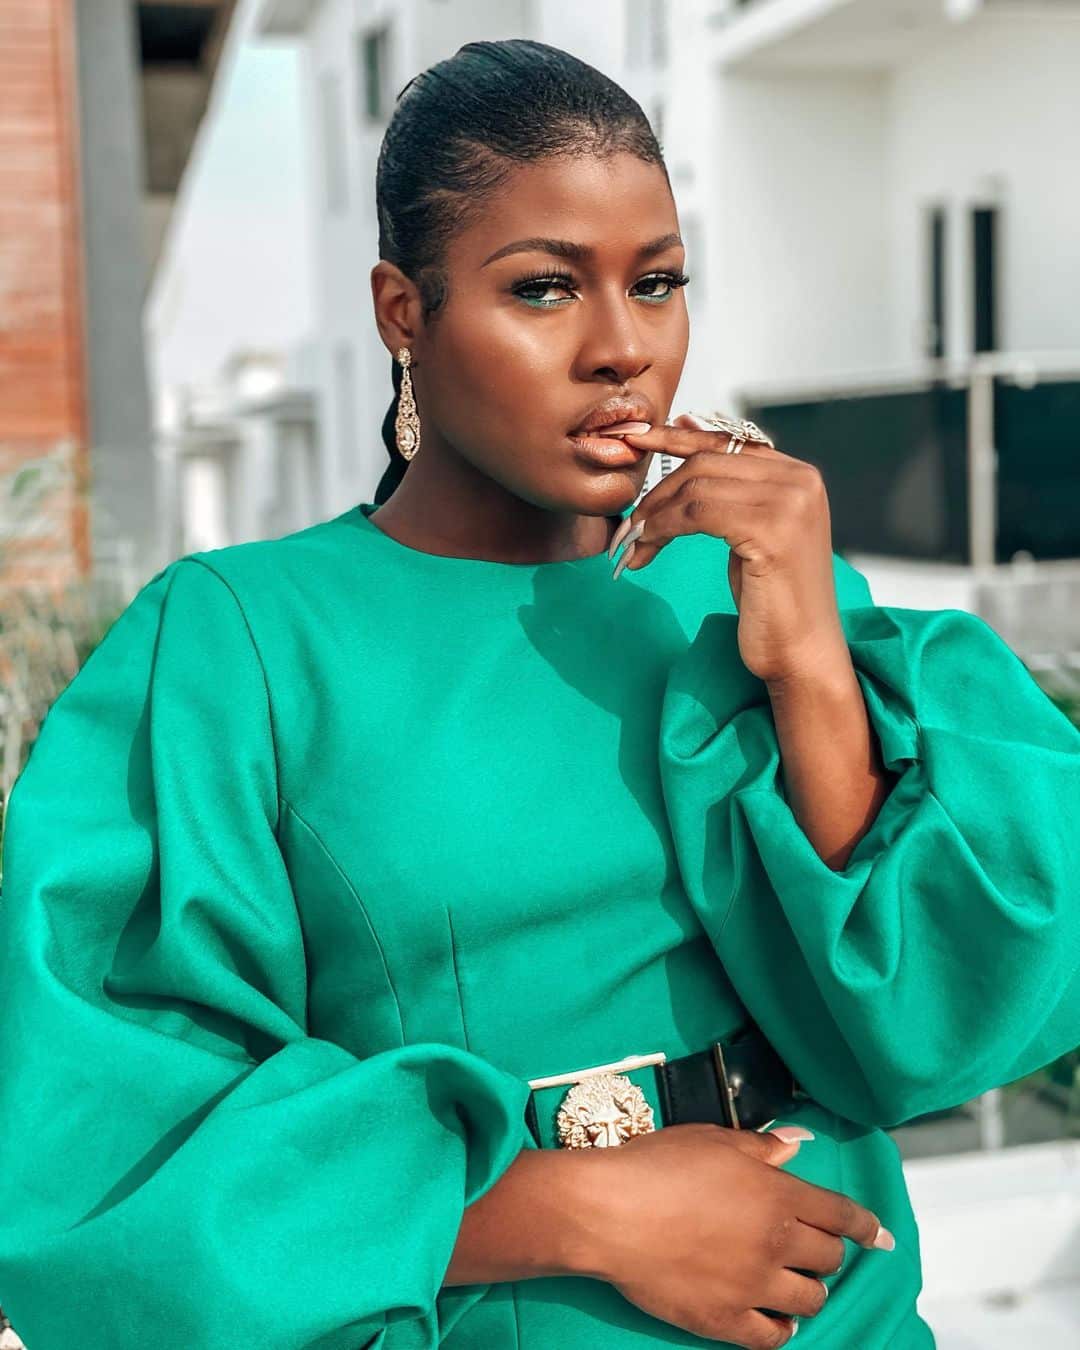 "My manager stole all the money I made after coming out of BBNaija’s house in 2018” - Alex Unusual